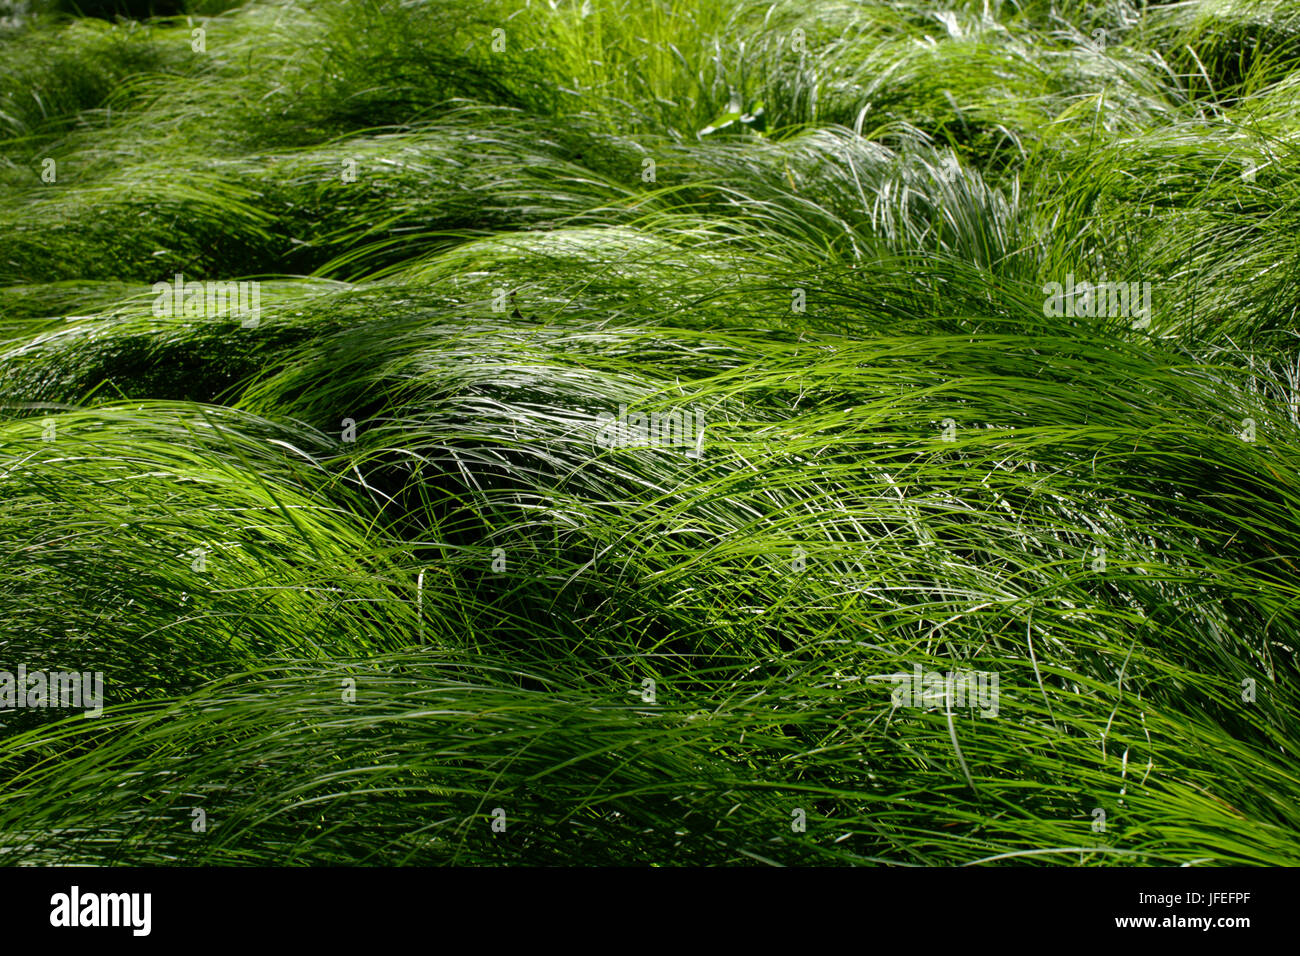 The Zittergras Segge, Carex brizoides, alp grass, forest hair or Quickly Stock Photo